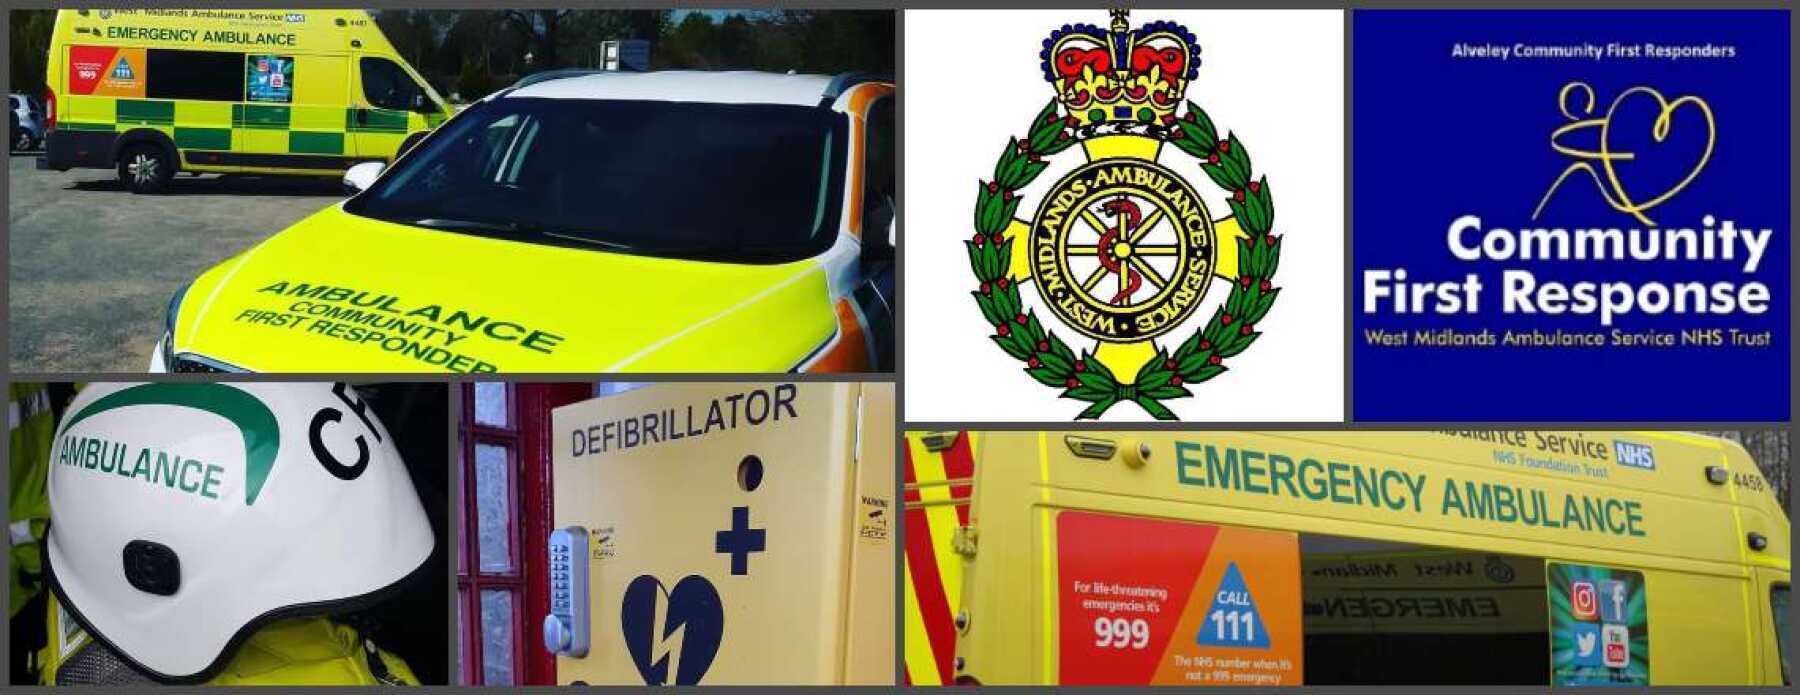 Featured Image for Alveley Community First Responders